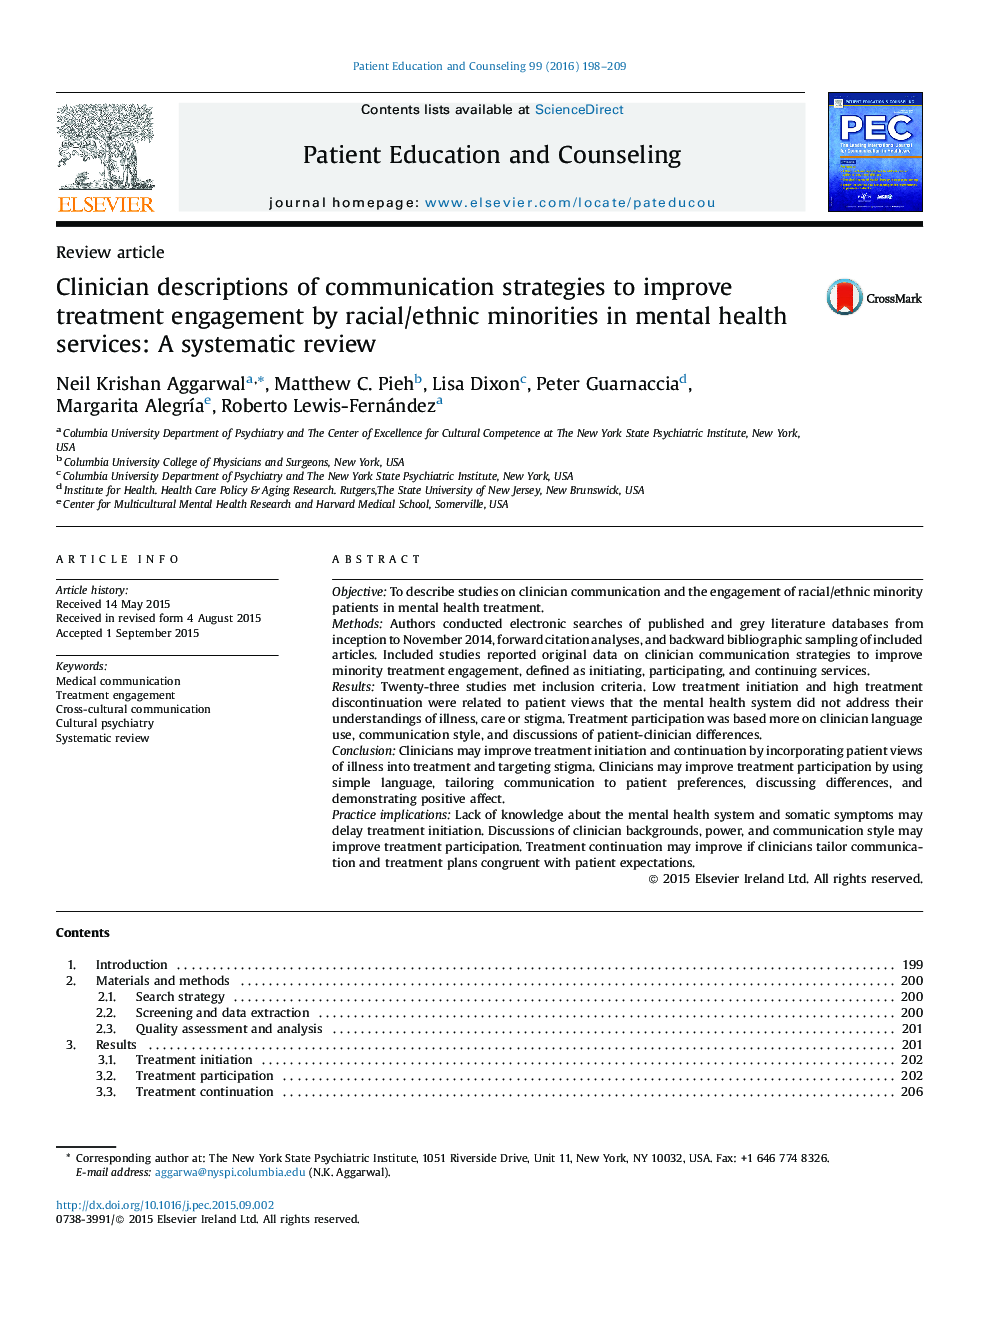 Clinician descriptions of communication strategies to improve treatment engagement by racial/ethnic minorities in mental health services: A systematic review